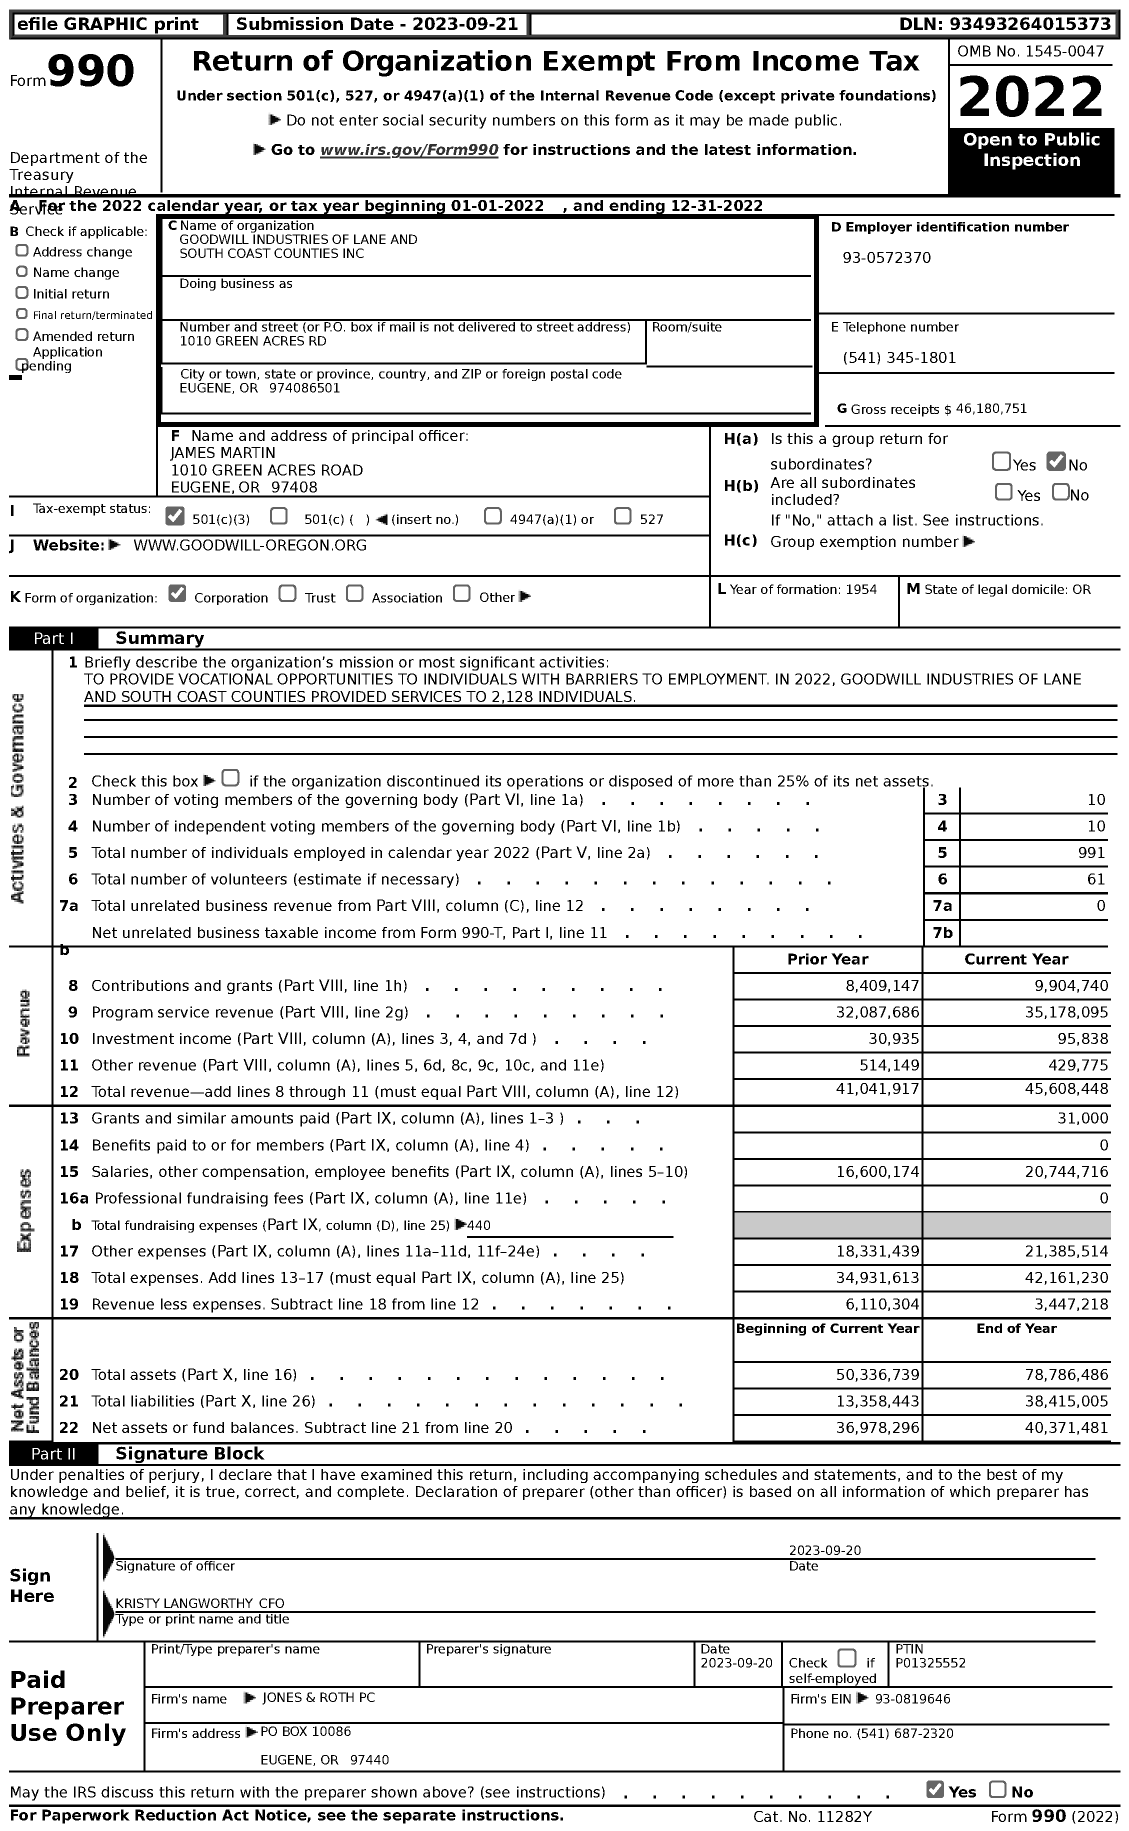 Image of first page of 2022 Form 990 for Goodwill Industries of Lane and South Coast Counties